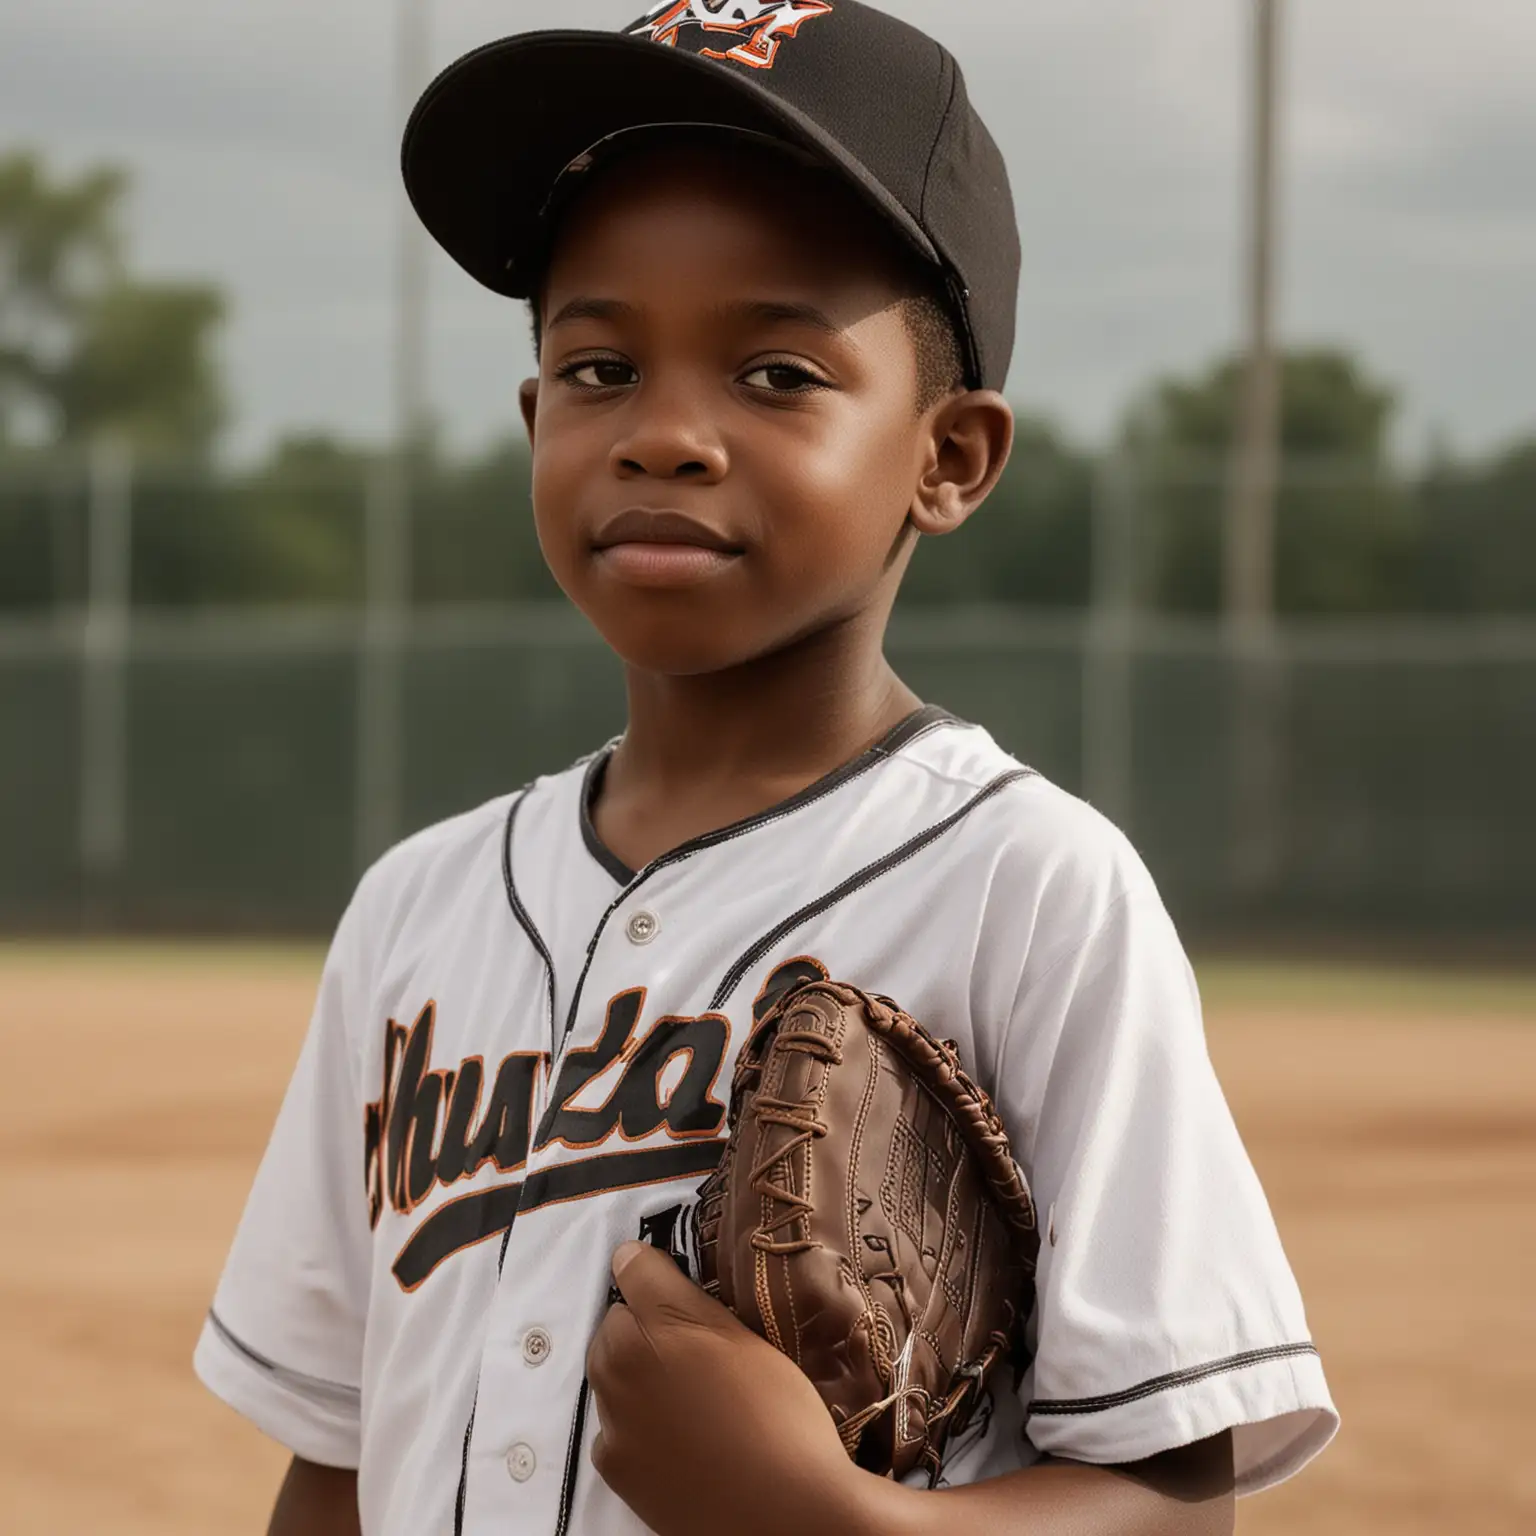 Young African American Boy Baseball Player in Action